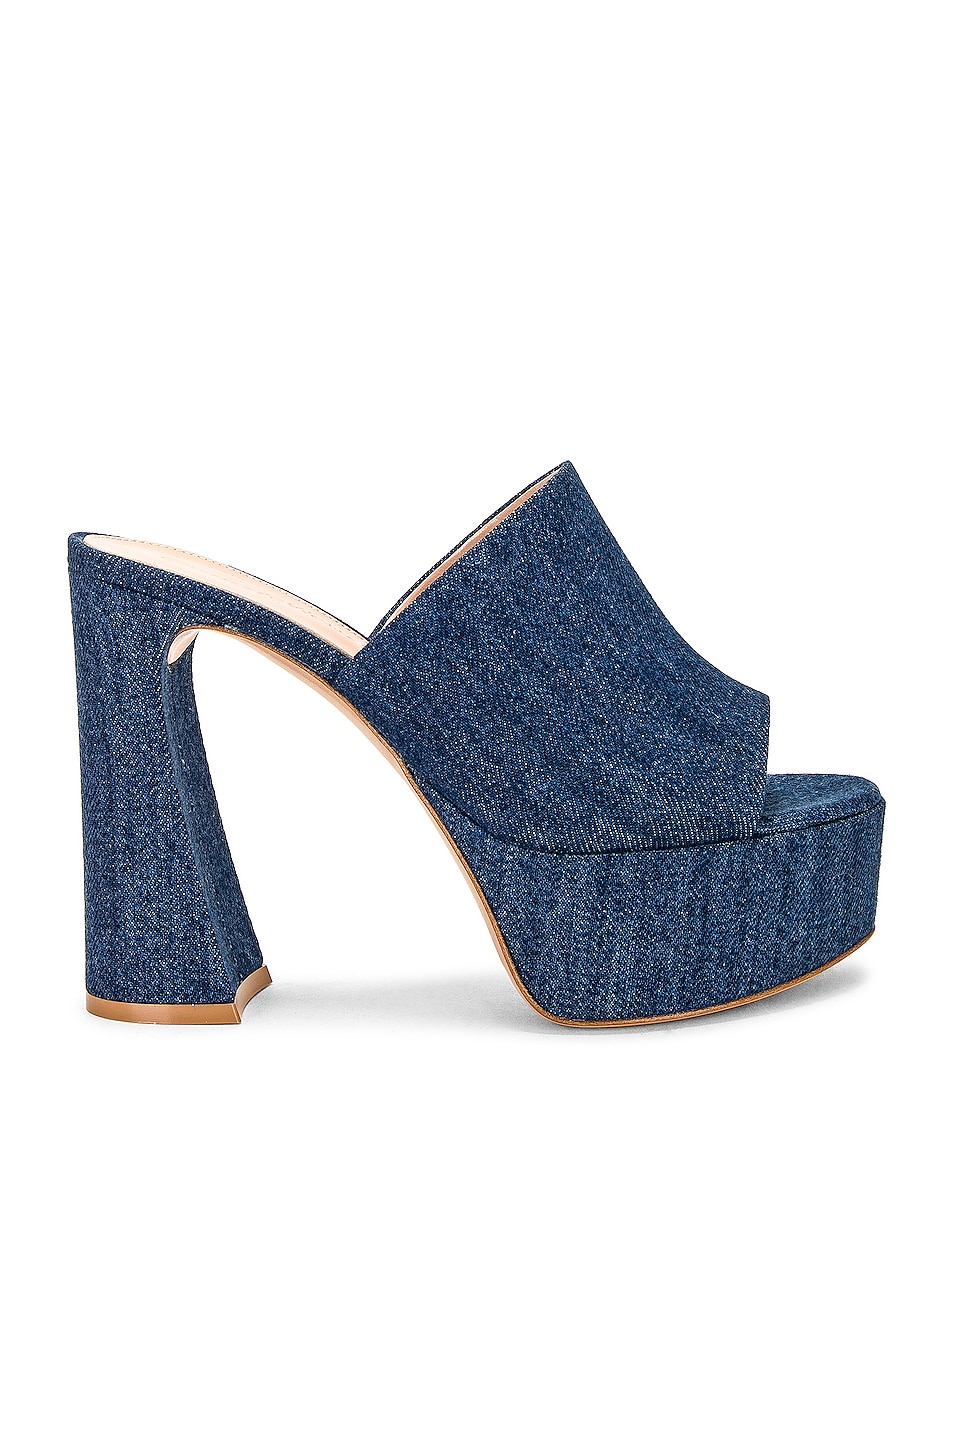 Image 1 of Gianvito Rossi Holly Platform Mule Sandal in Mid Blue